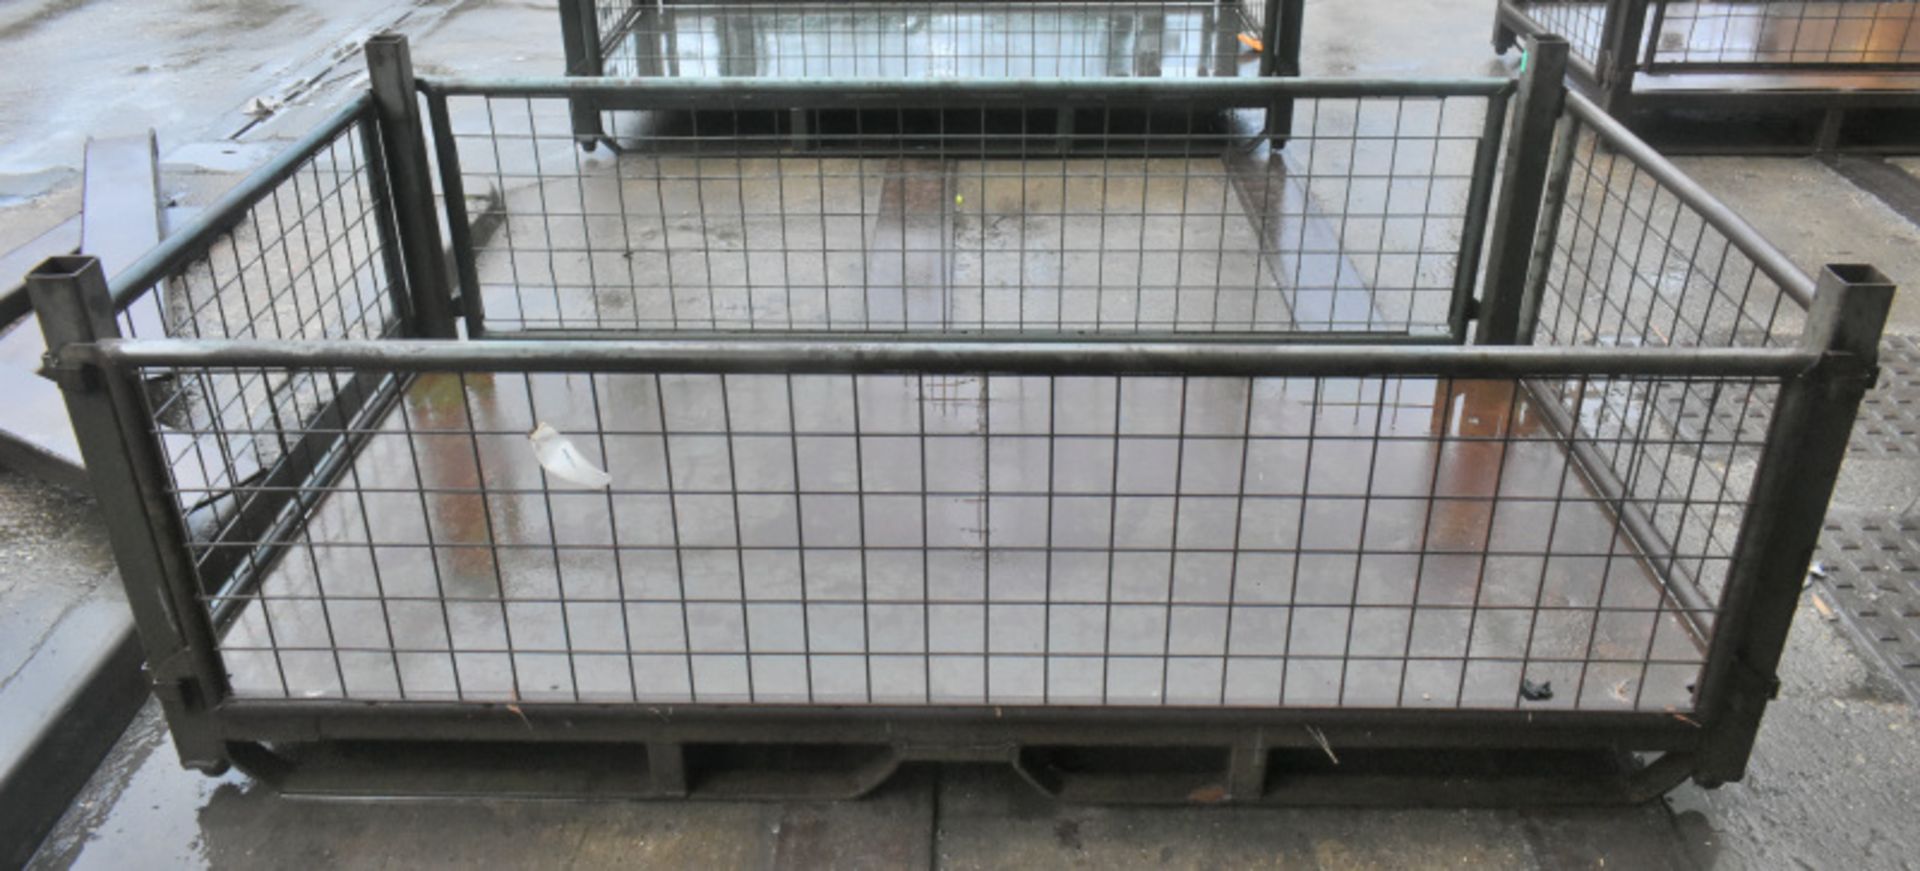 Longspan Metal Stillage - External dimensions L213 x W113 x H82cm - PLEASE SEE PICTURES FOR CONDITIO - Image 3 of 4